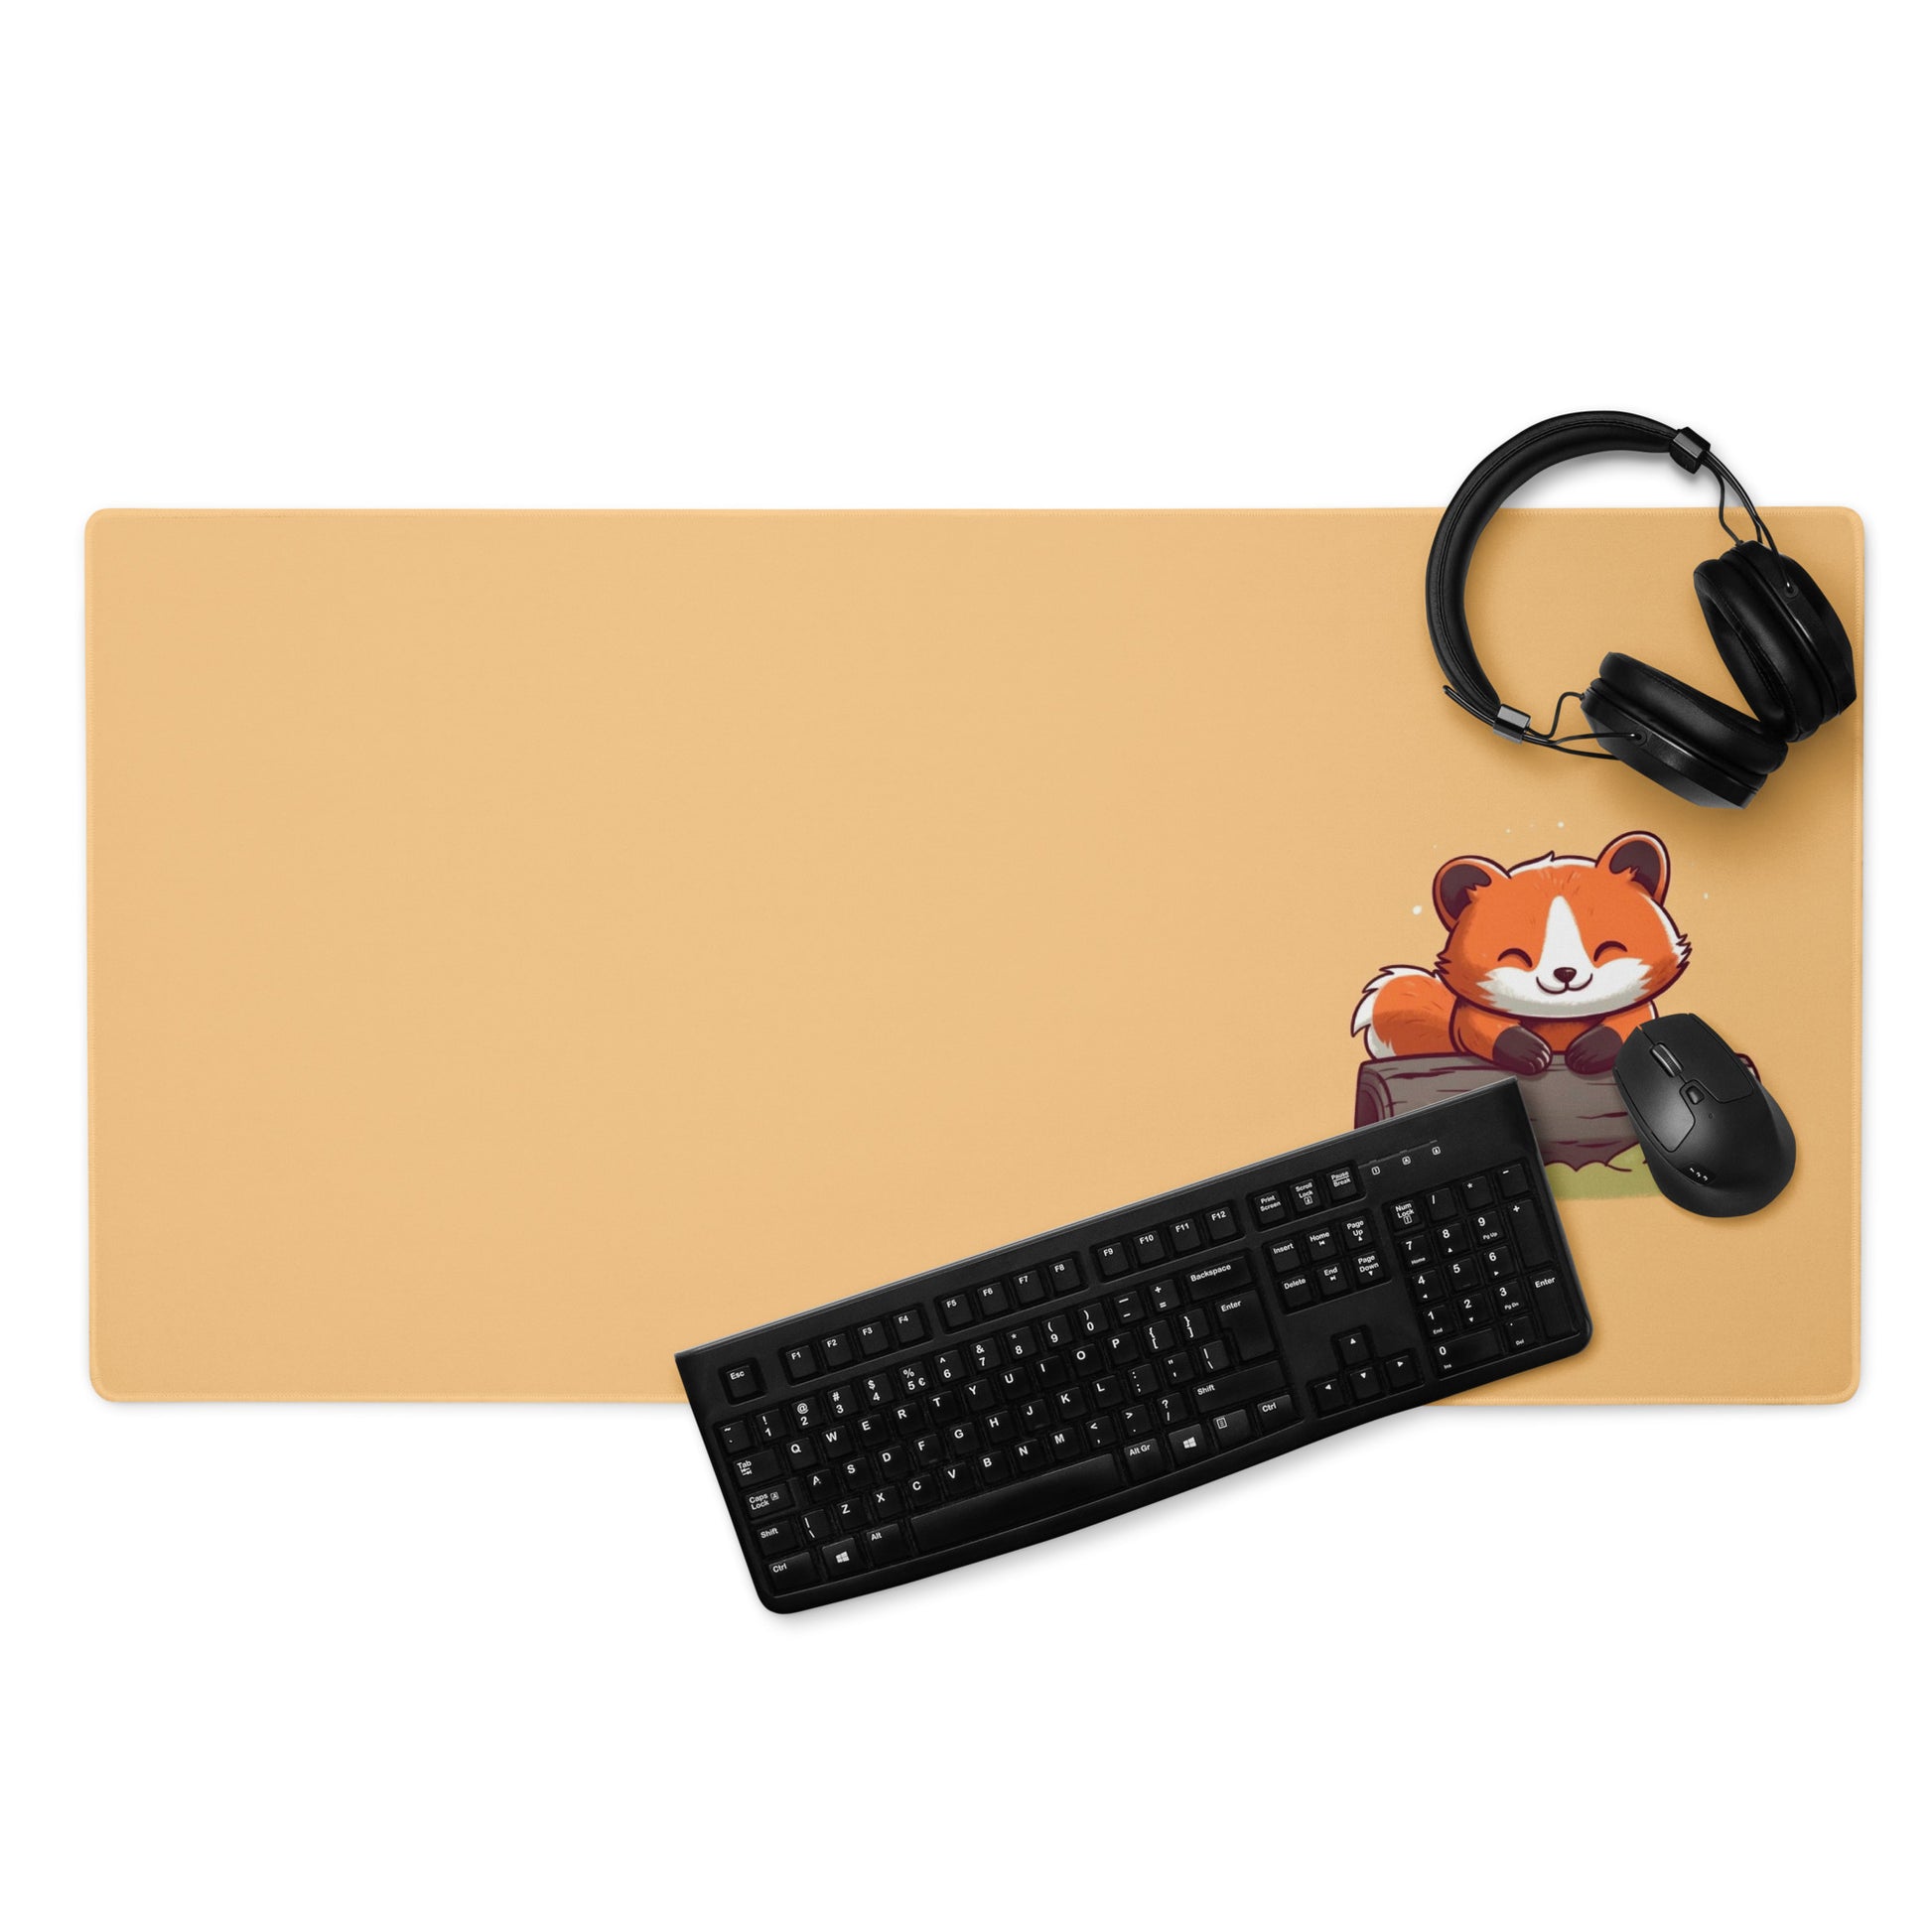 A gaming desk pad with a kawaii red panda smiling and leaning on a log. The background of the desk mat is orange. A keyboard, mouse, and headphones sit on the desk mat.